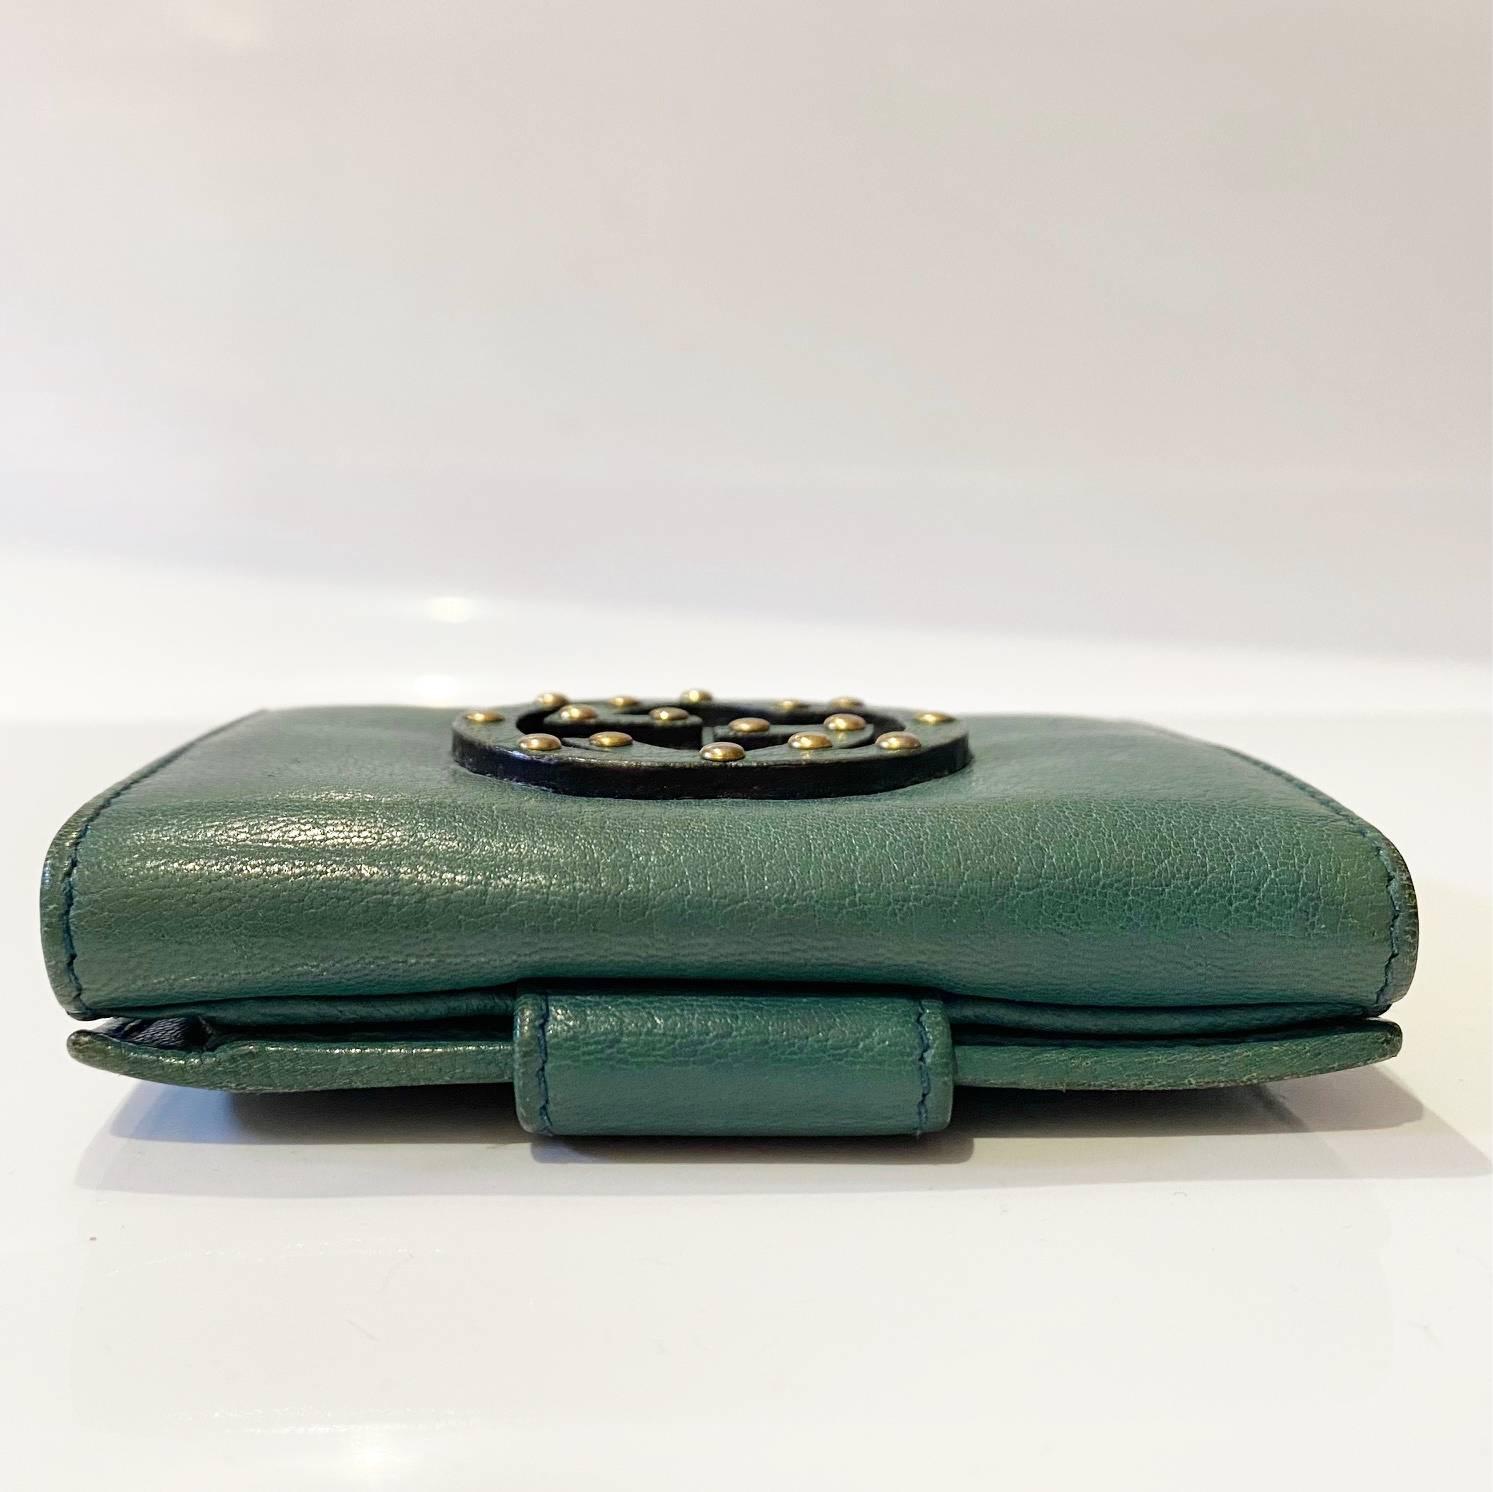 2000's Gucci Blondie Green leather wallet,  front stud logo, coin compartment with button closure, several card and note compartment, Made in Italy  This luxurious leather wallet is designed for maximum durability and organization. With its secure